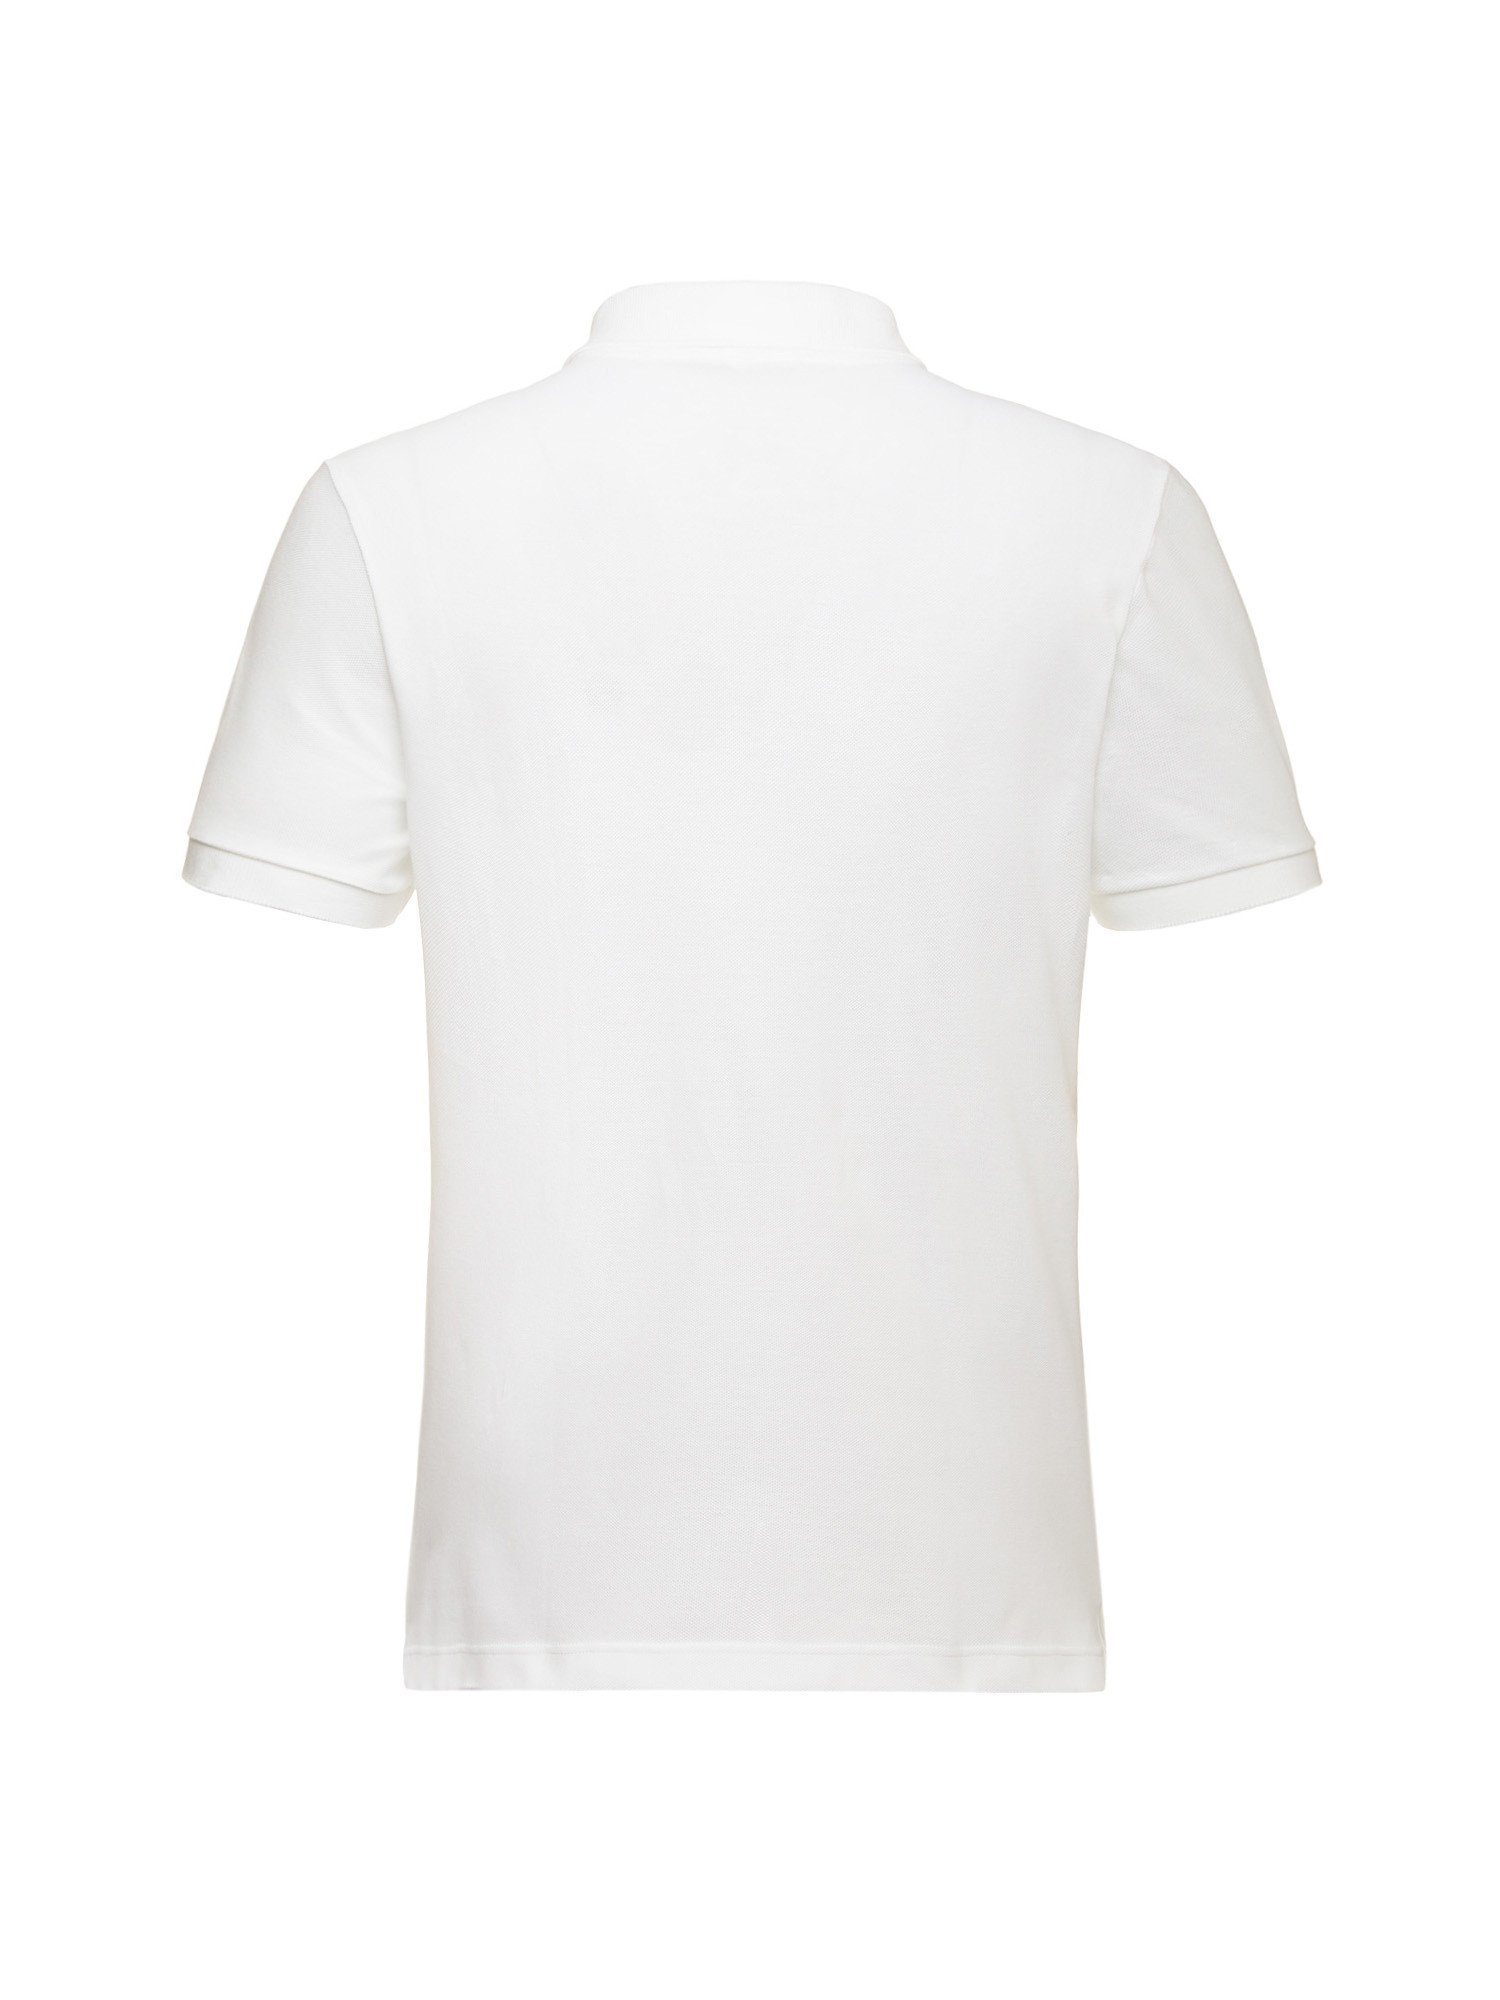 Lacoste - Slim-fit polo shirt in cotton petit piqué, White, large image number 1